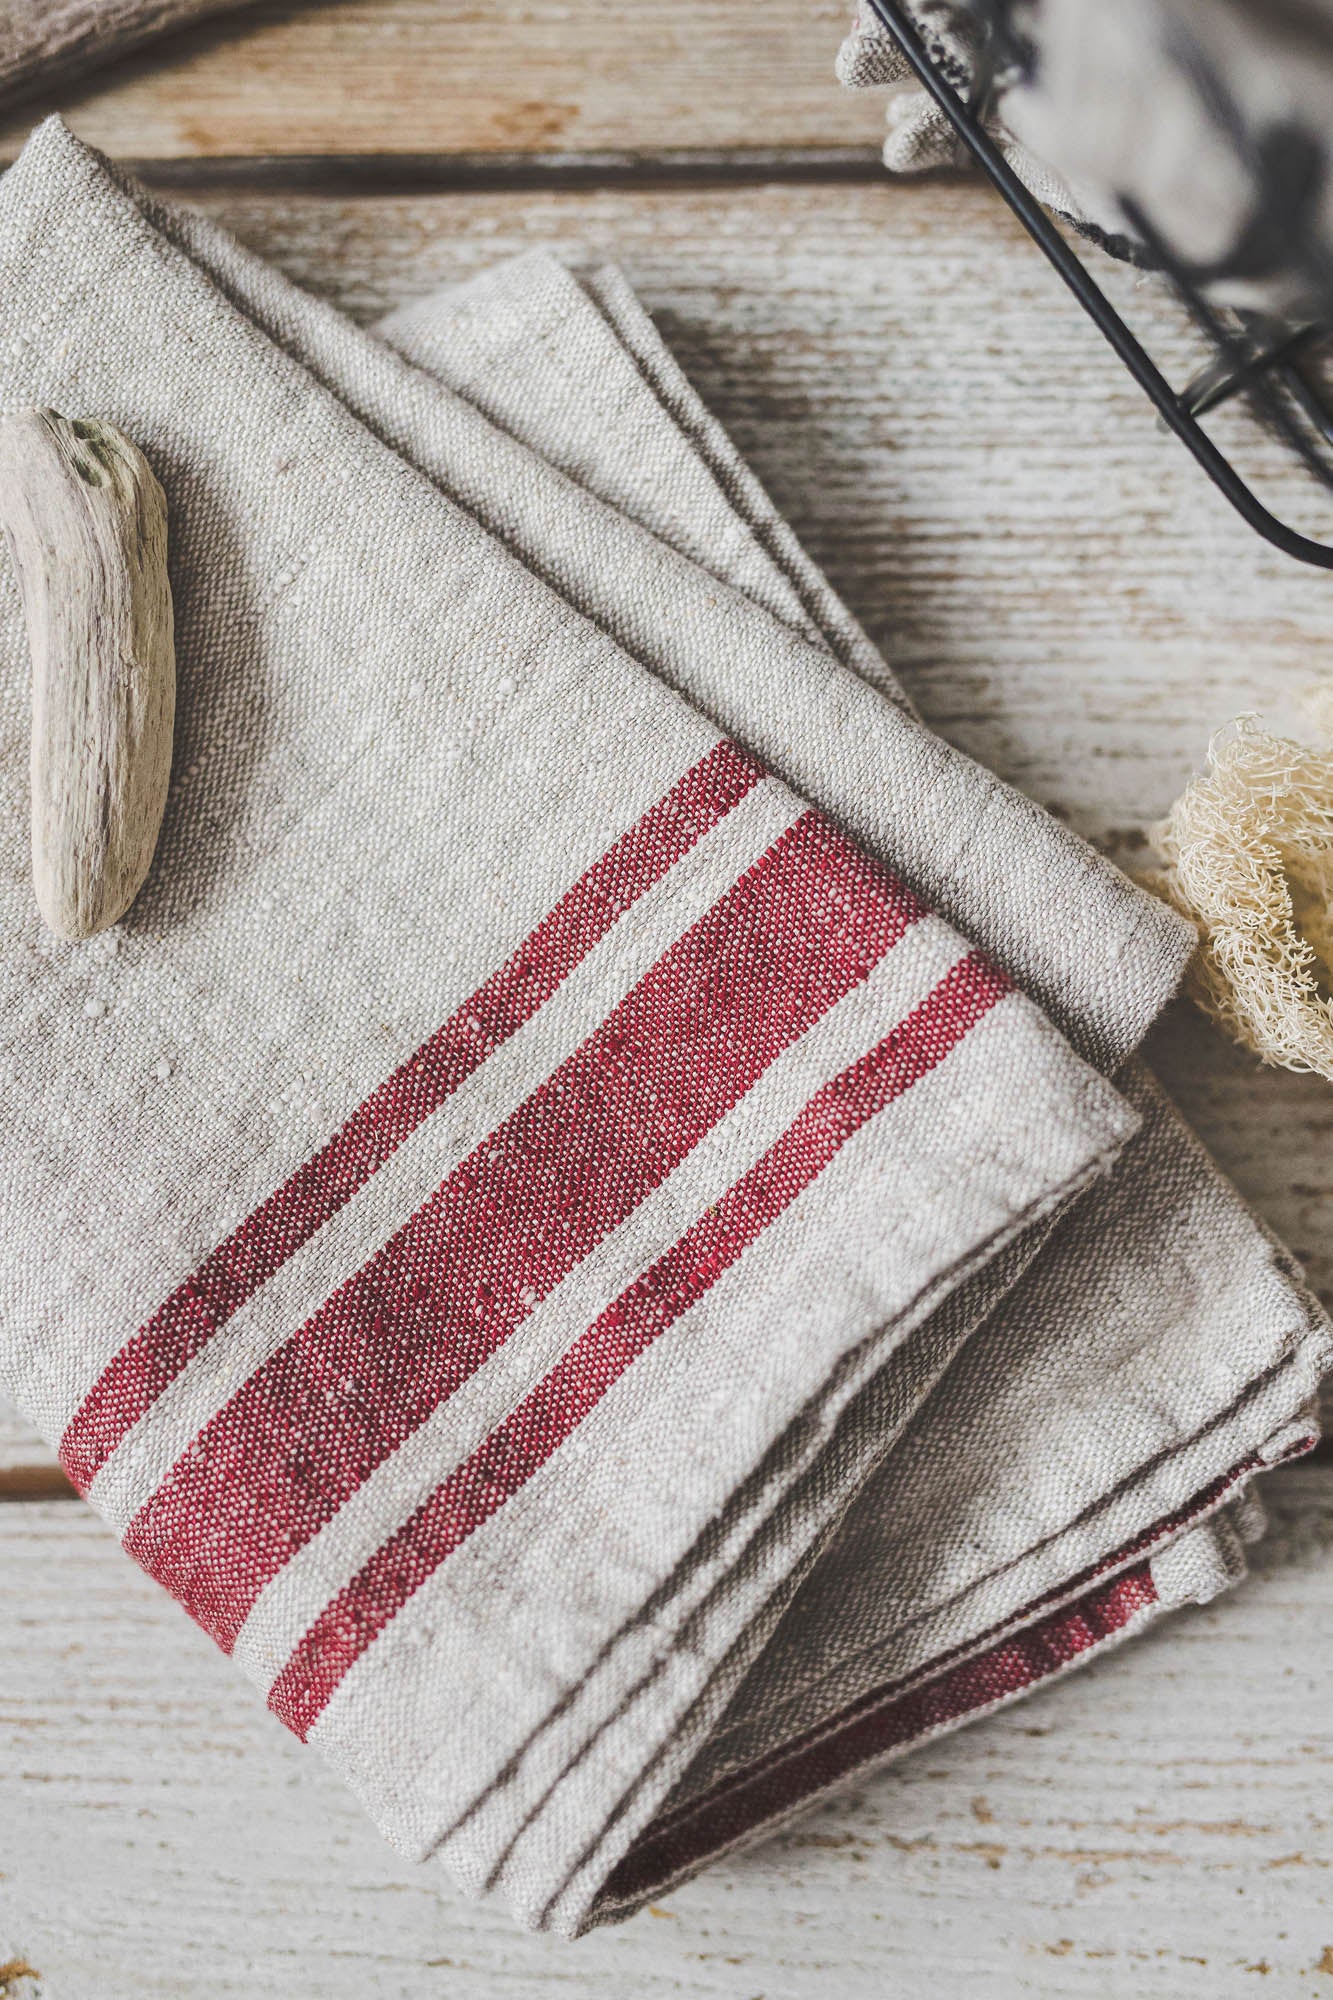 Linen towels with cherry red stripes - set of 2